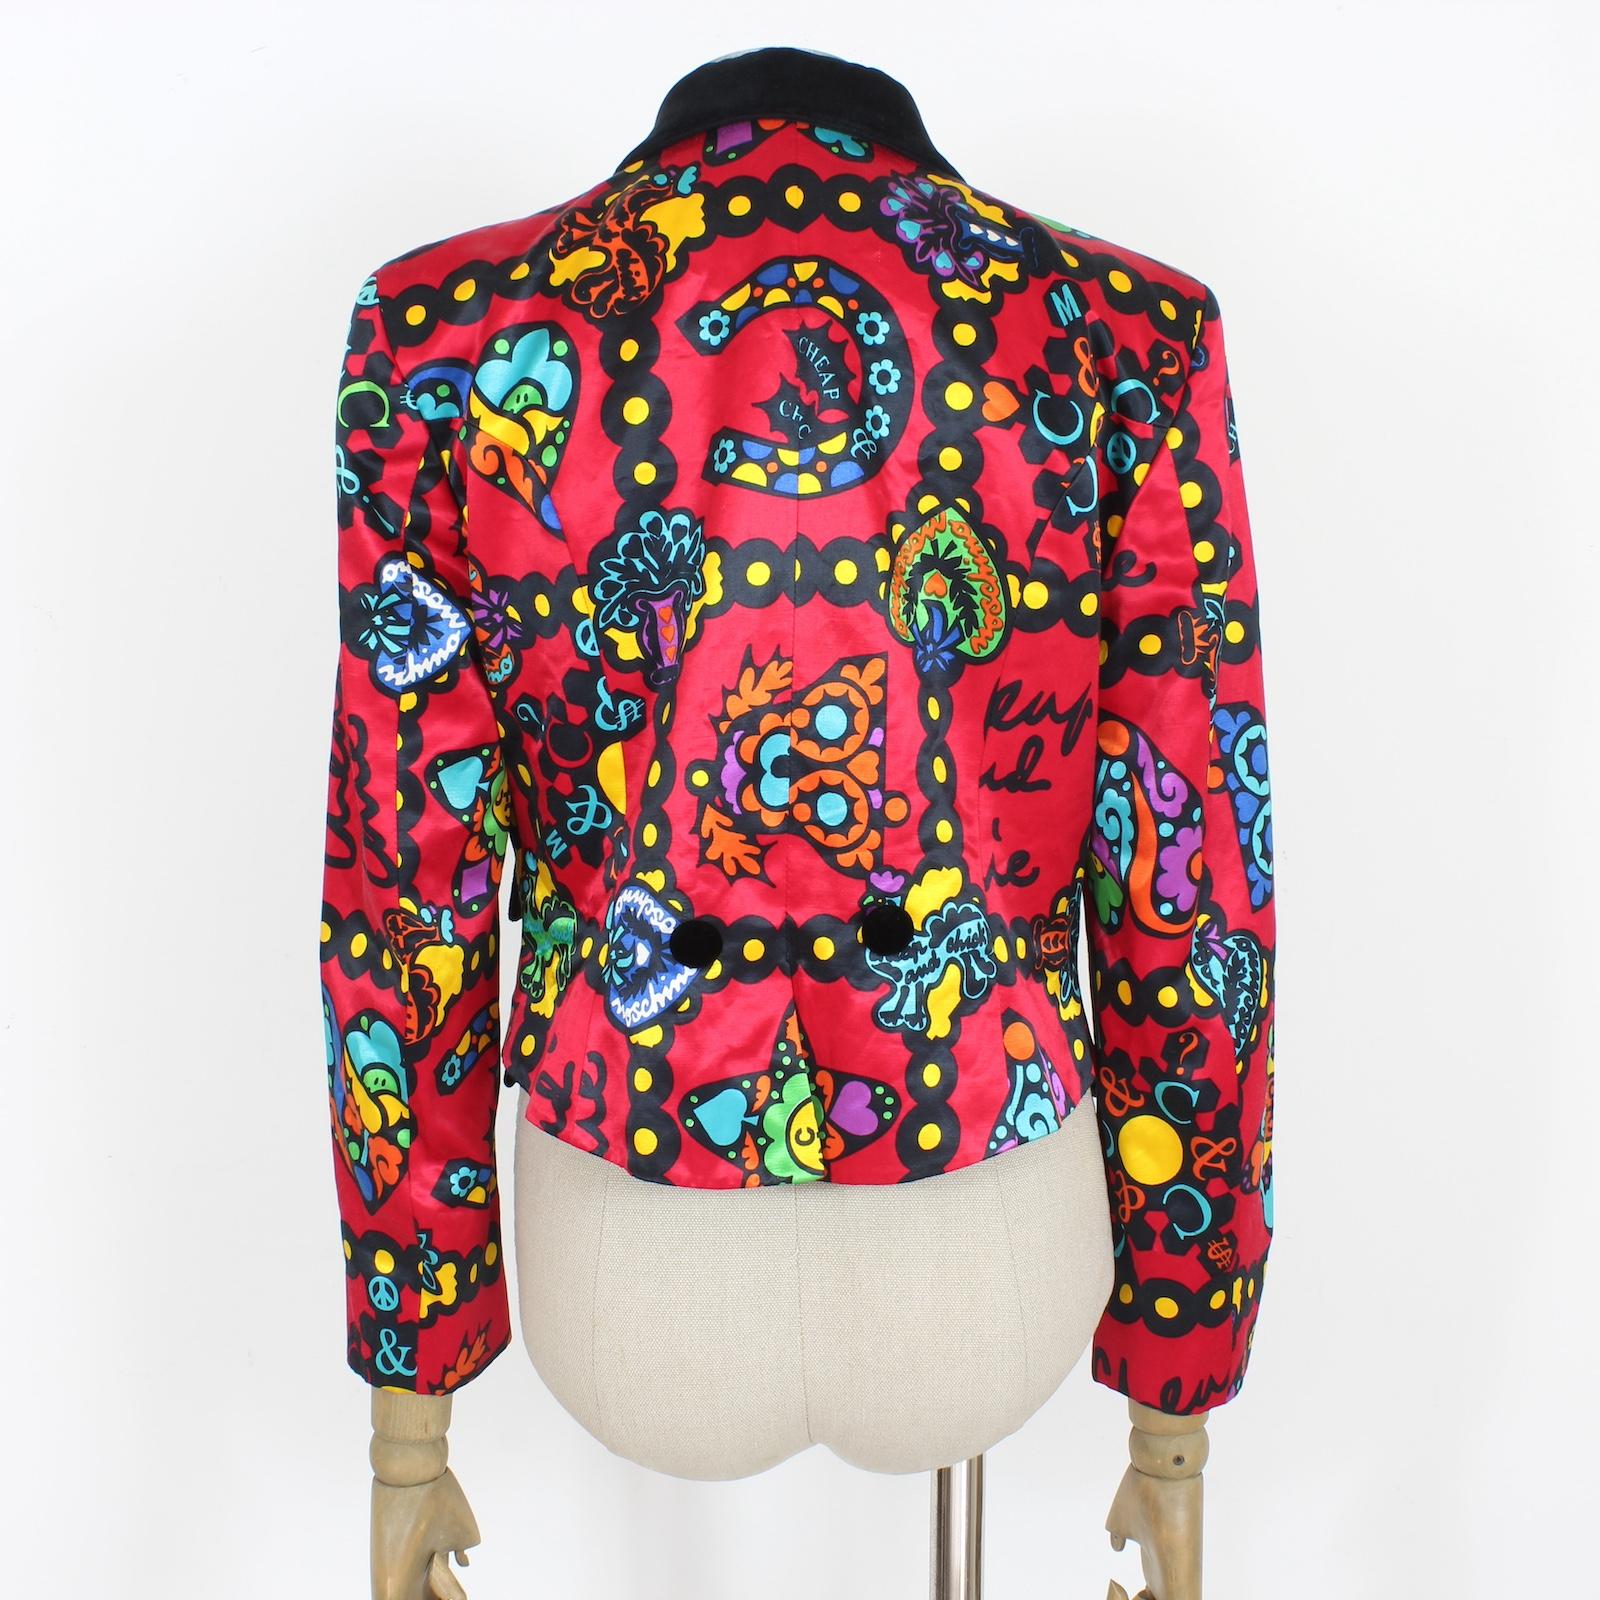 Capture the essence of the 1990s with this iconic Franco Moschino design. This blazer jacket features playful messages and bold symbols such as peace signs, hearts, bows, and dollar signs. Its fabric for 58% cotton and rayon for 42 % has a satin